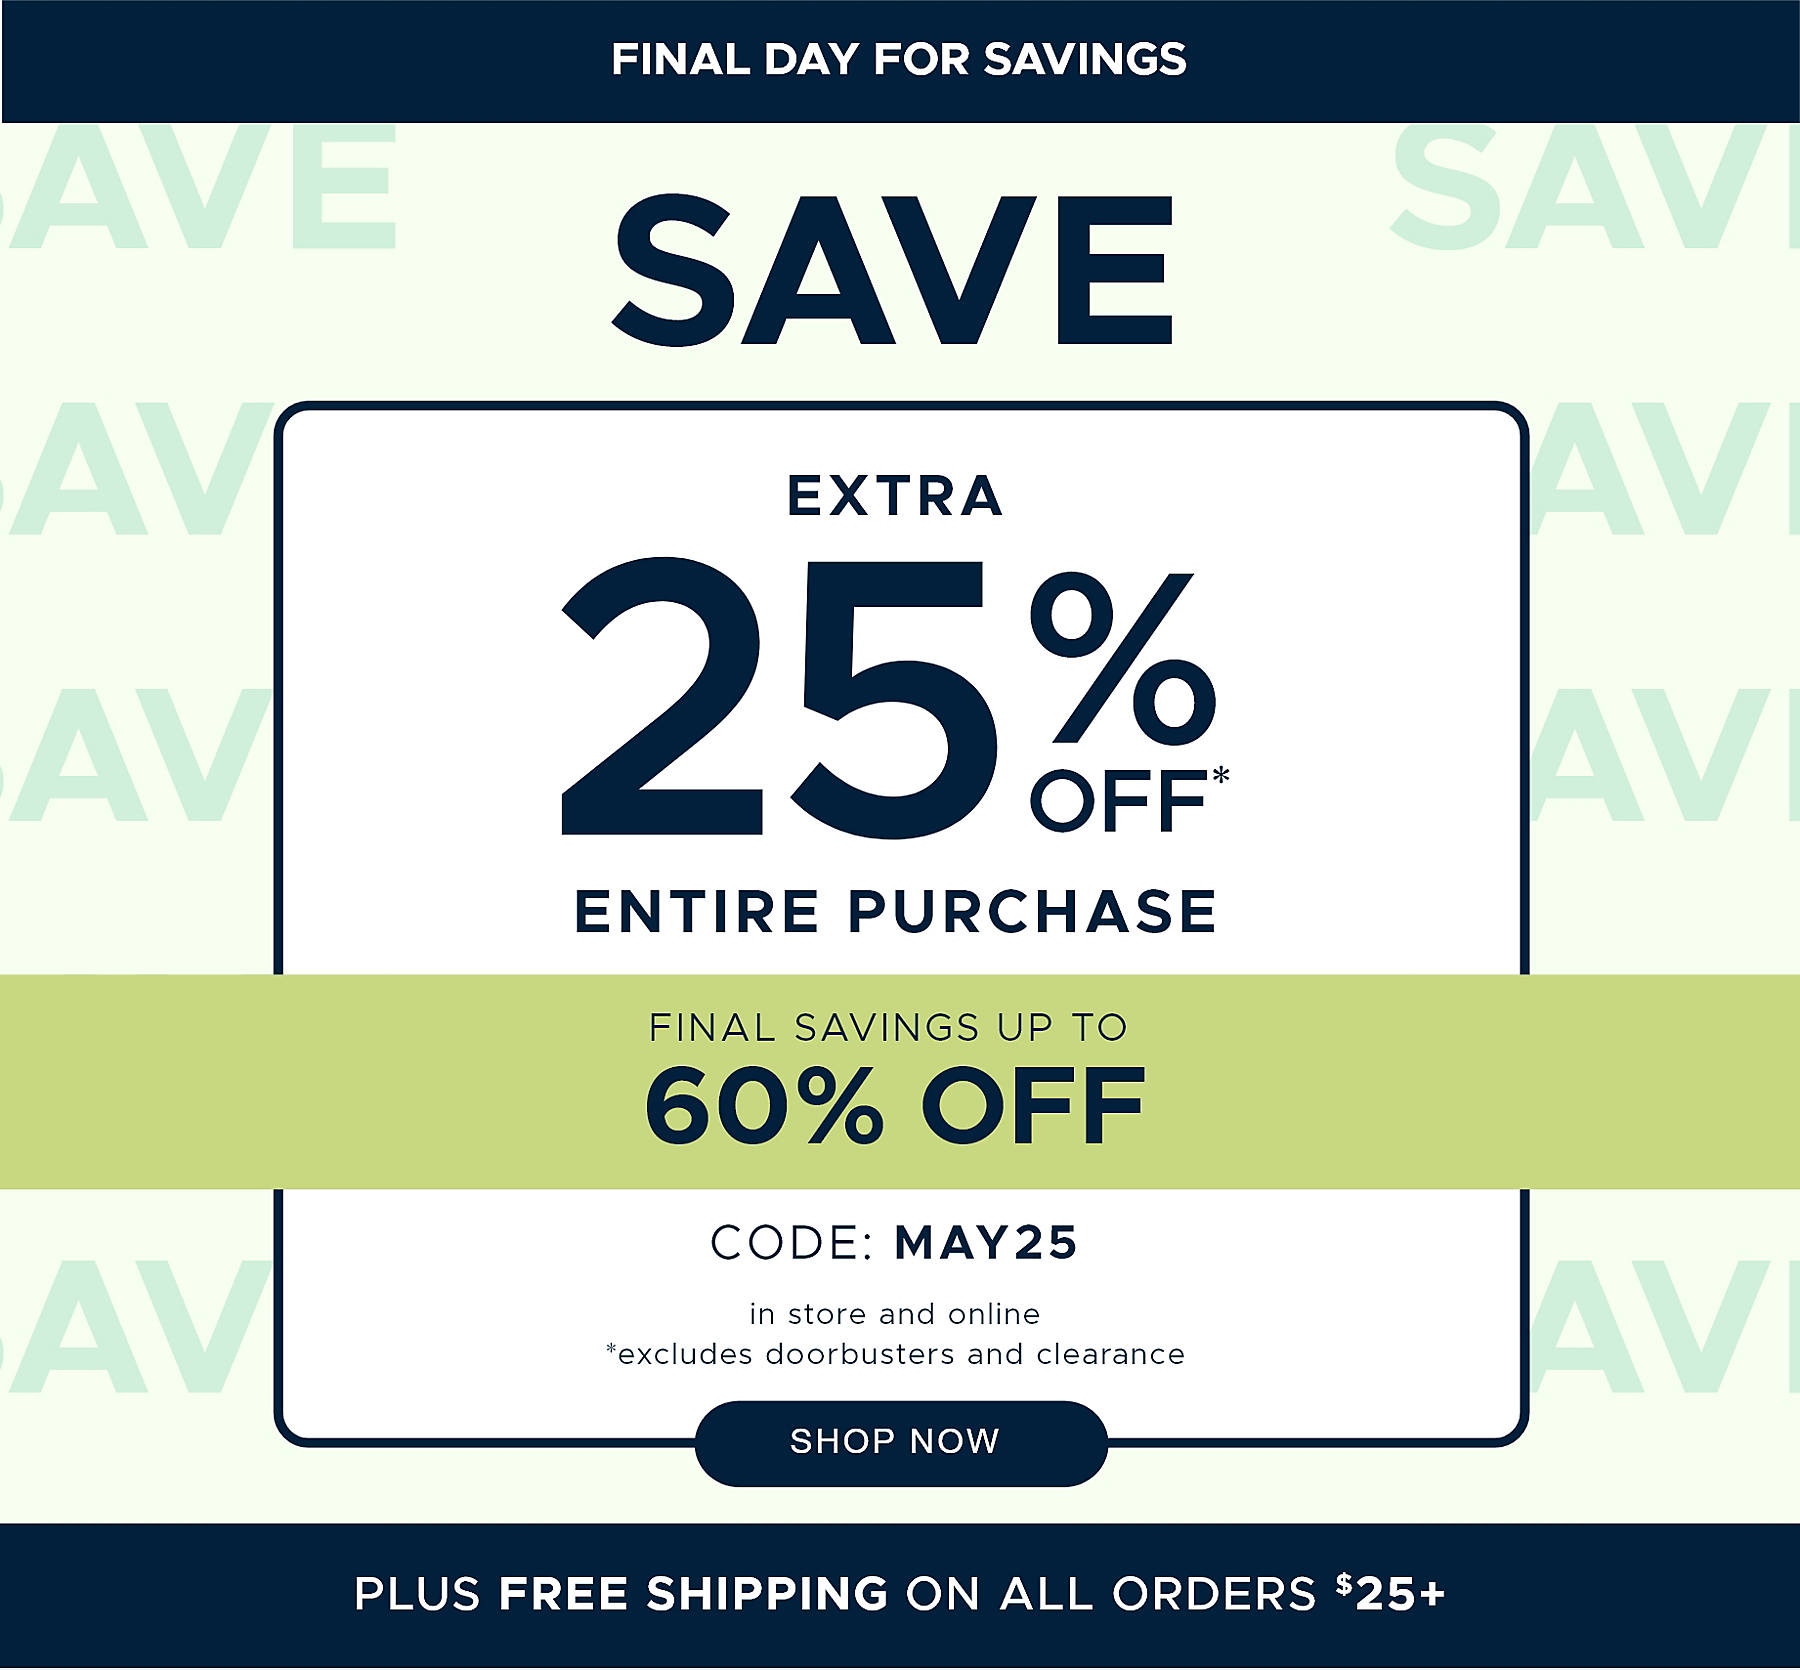 Final Day for Savings Save extra 25% off* Entire Purchase Final Savings Up to 60% off code: MAY25 in store and online *excludes doorbusters and clearance Plus Free Shipping on All Orders $25+